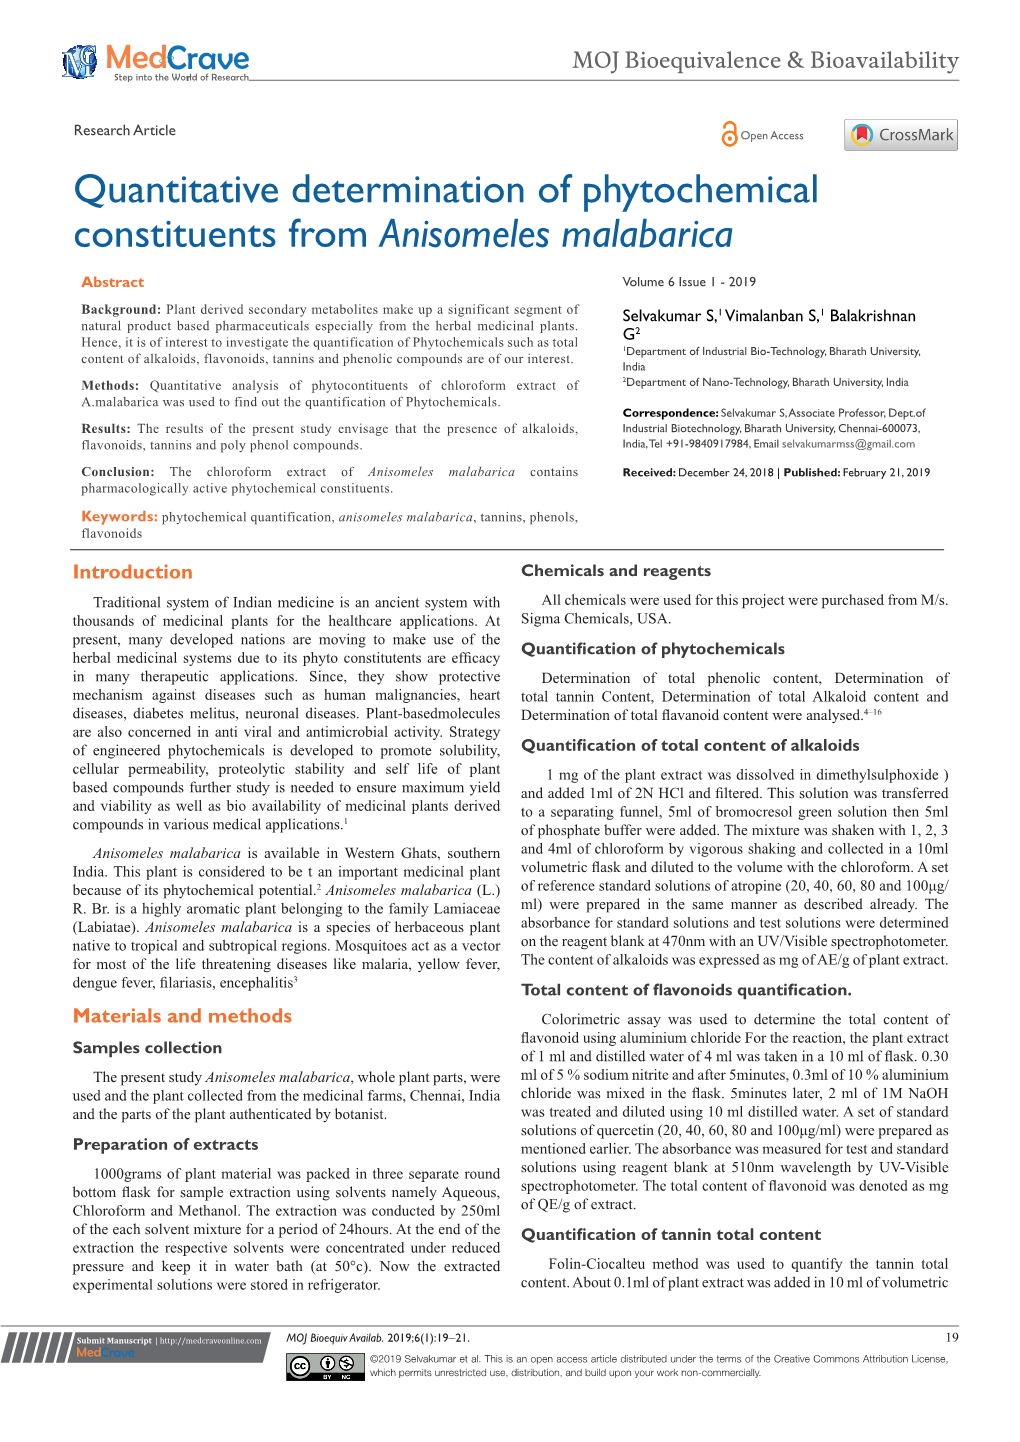 Quantitative Determination of Phytochemical Constituents from Anisomeles Malabarica